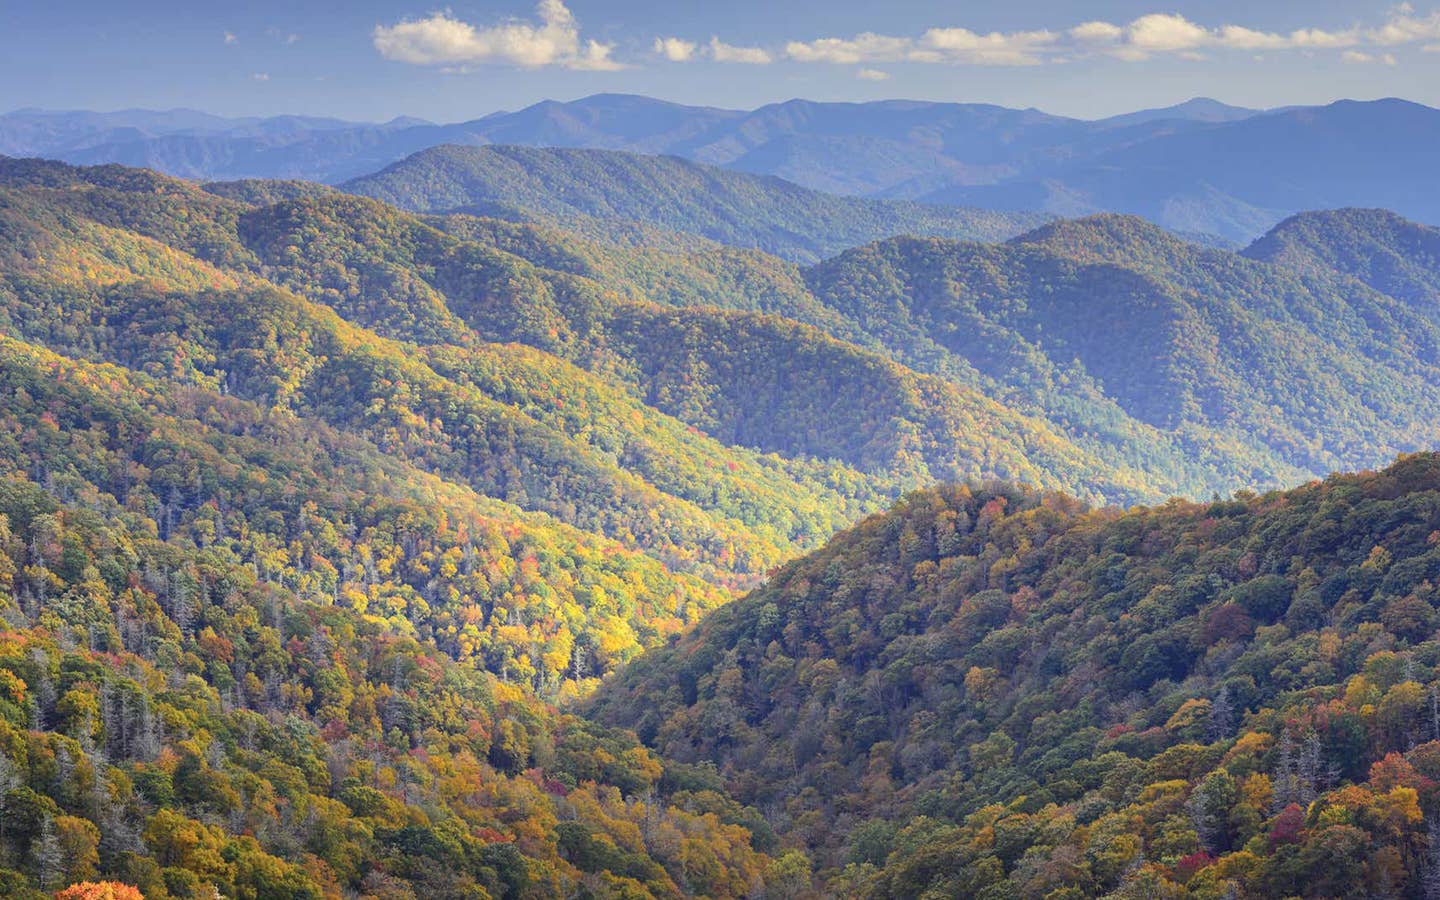 Aerial view of the Smoky Mountains